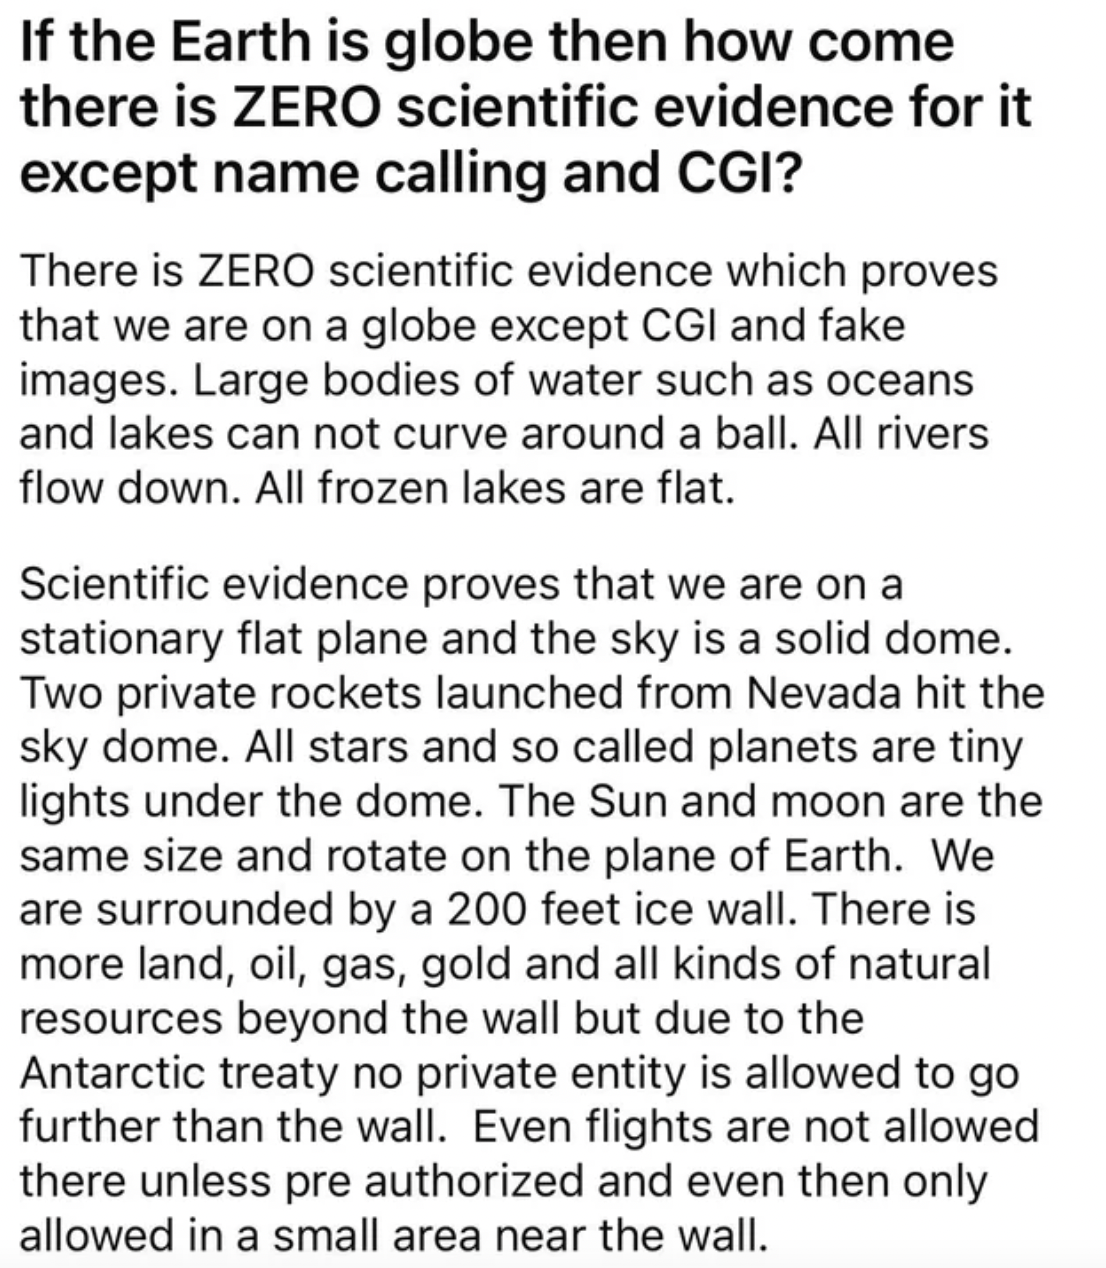 Confidently Incorrect - document - If the Earth is globe then how come there is Zero scientific evidence for it except name calling and Cgi? There is Zero scientific evidence which proves that we are on a globe except Cgi and fake images. Large bodies of